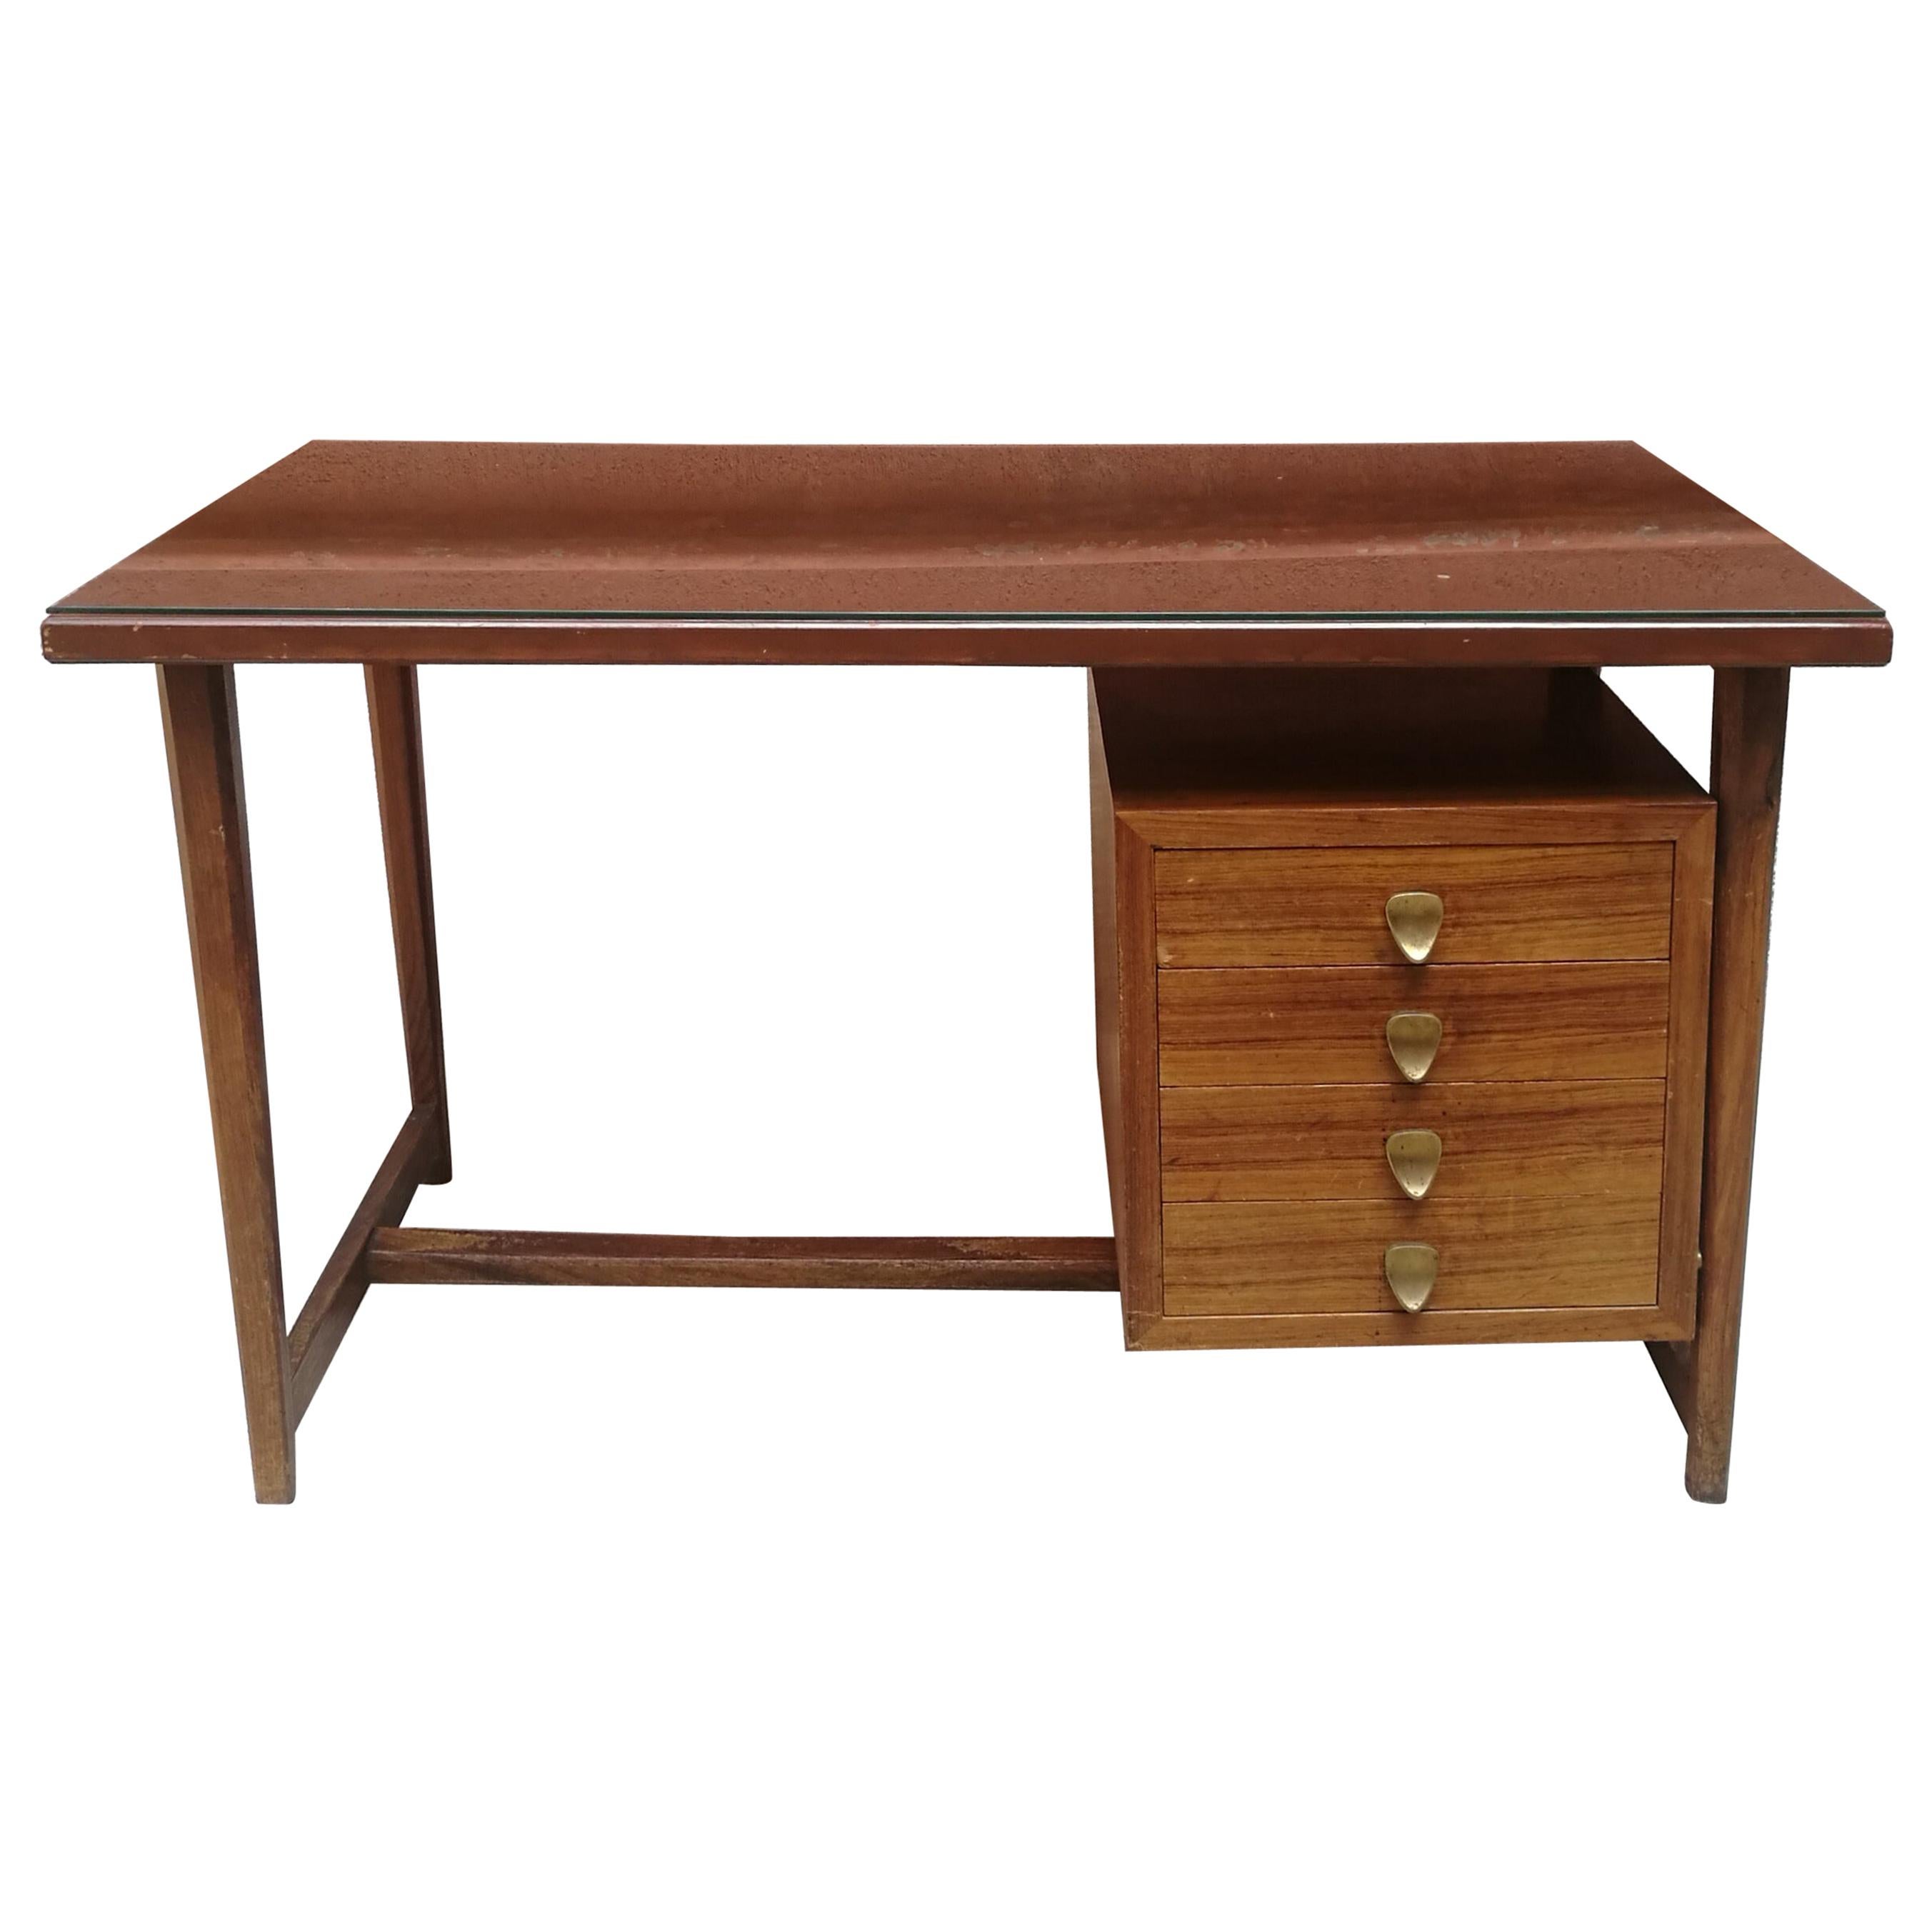 Midcentury Italian, Wood and Brass Desk with Glass Top, 1960s